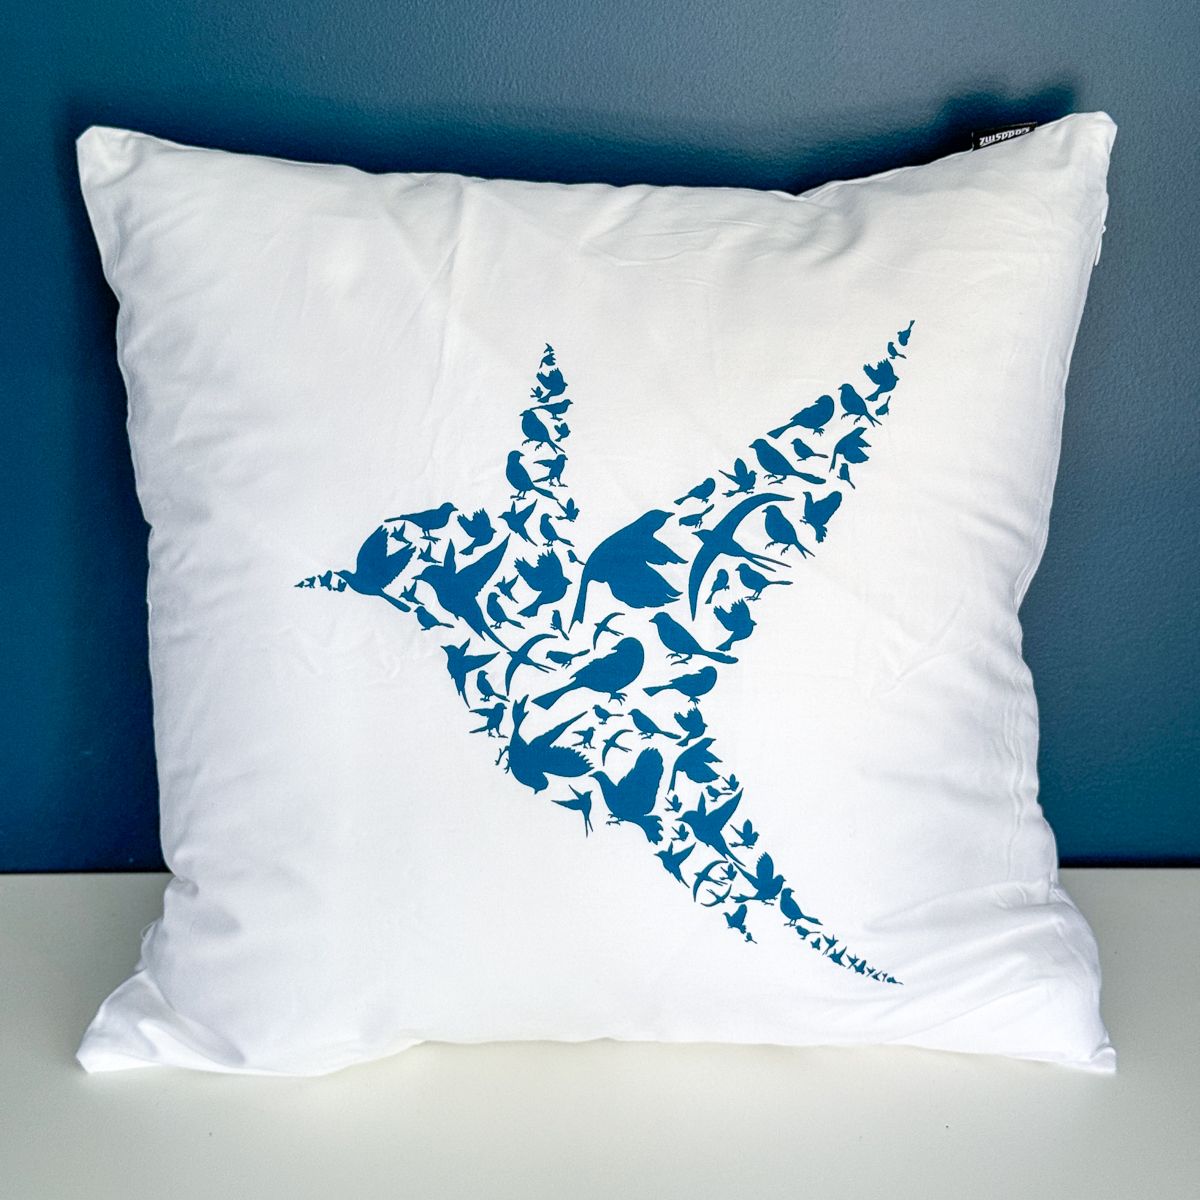 DIY screen printed pillow cover with image of birds